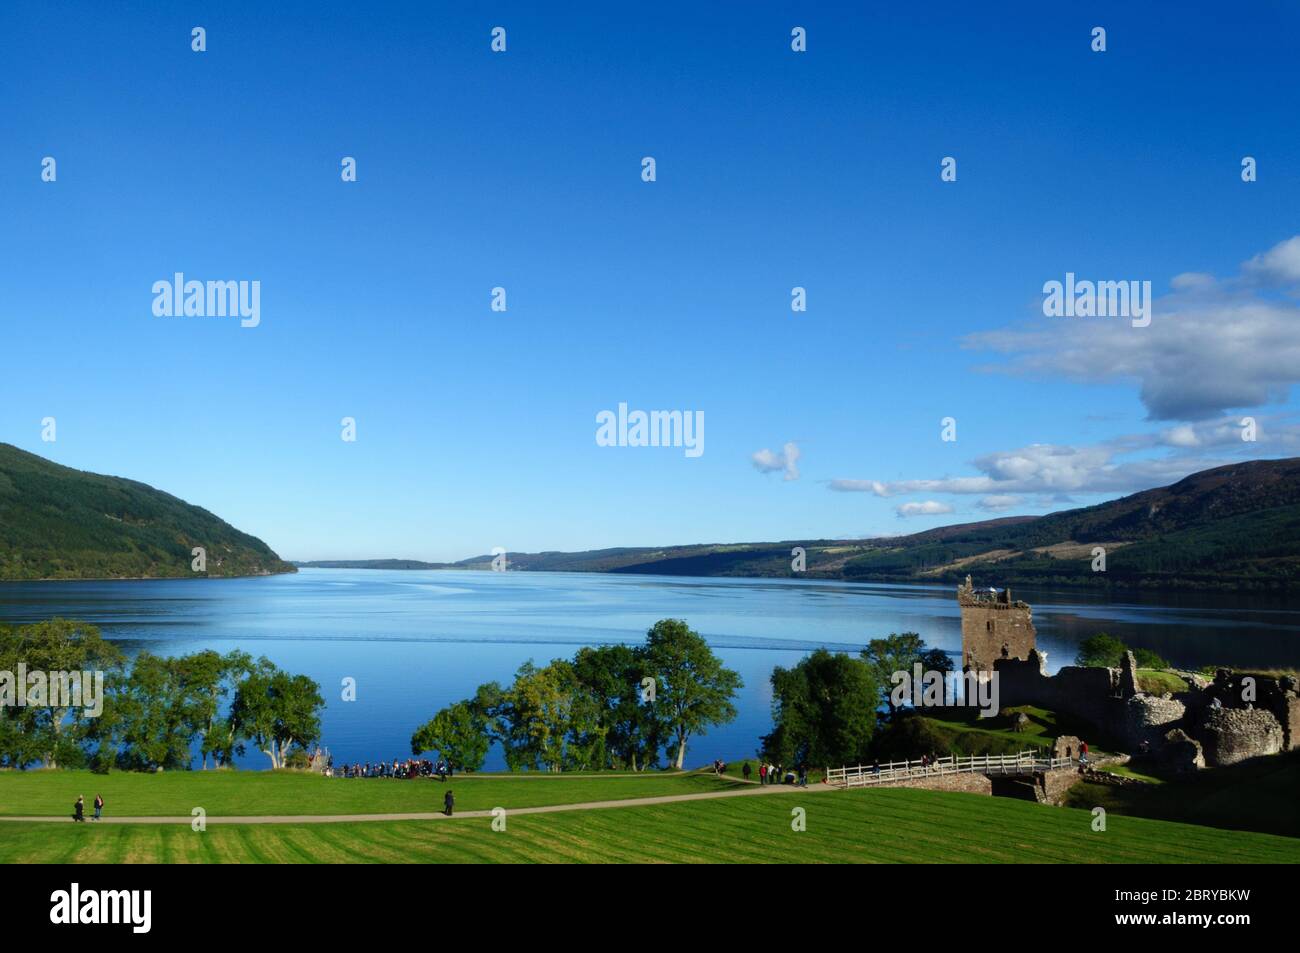 Visitors at Urquhart Castle on the shore of the world famous Loch Ness, known for the mystery sightings of 'Nessie' the Loch Ness Monster Stock Photo